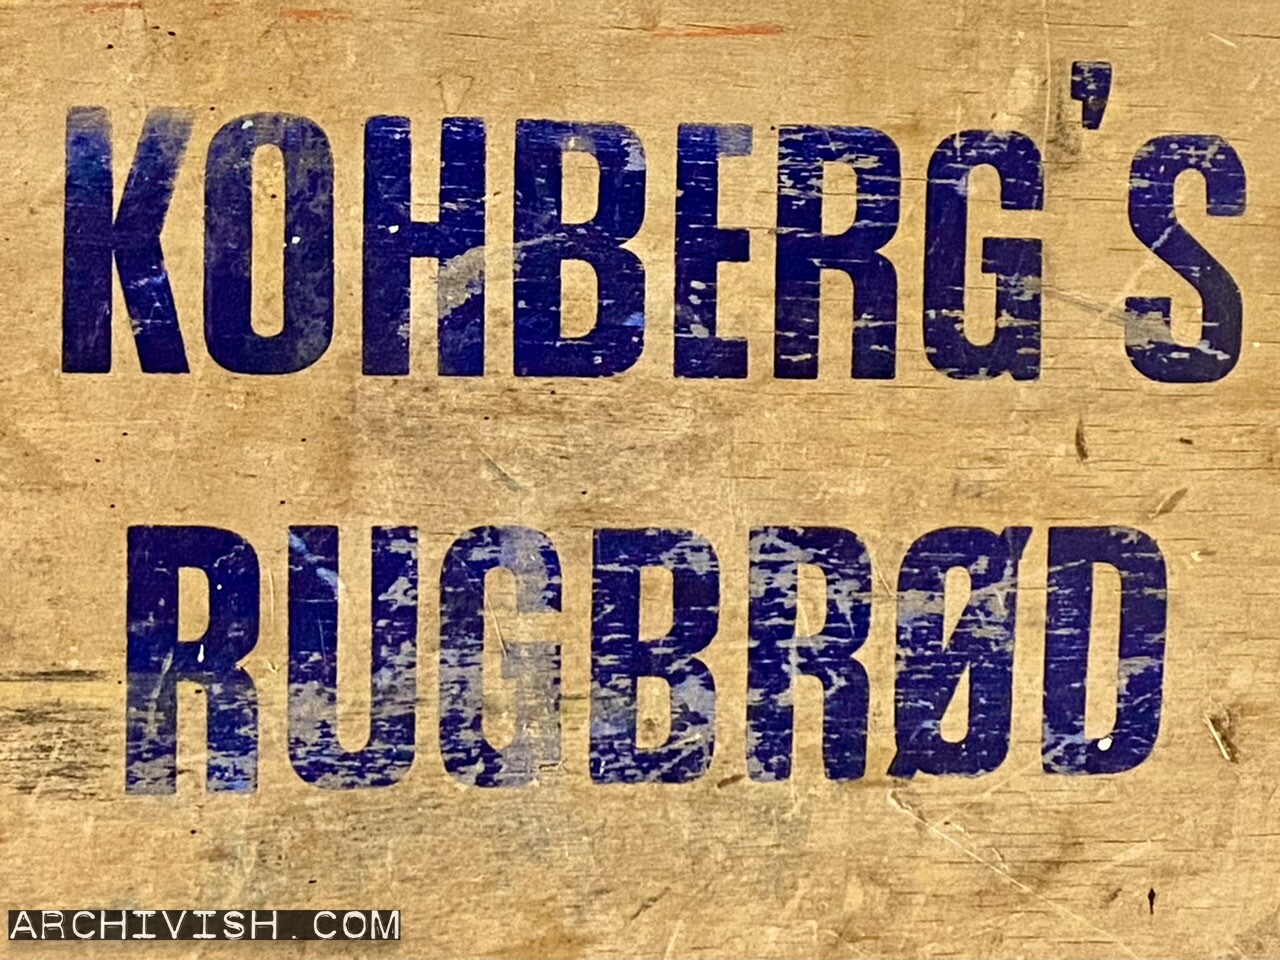 Ryebread from Kohberg's Breadfactory was delivered in Plyfa boxes